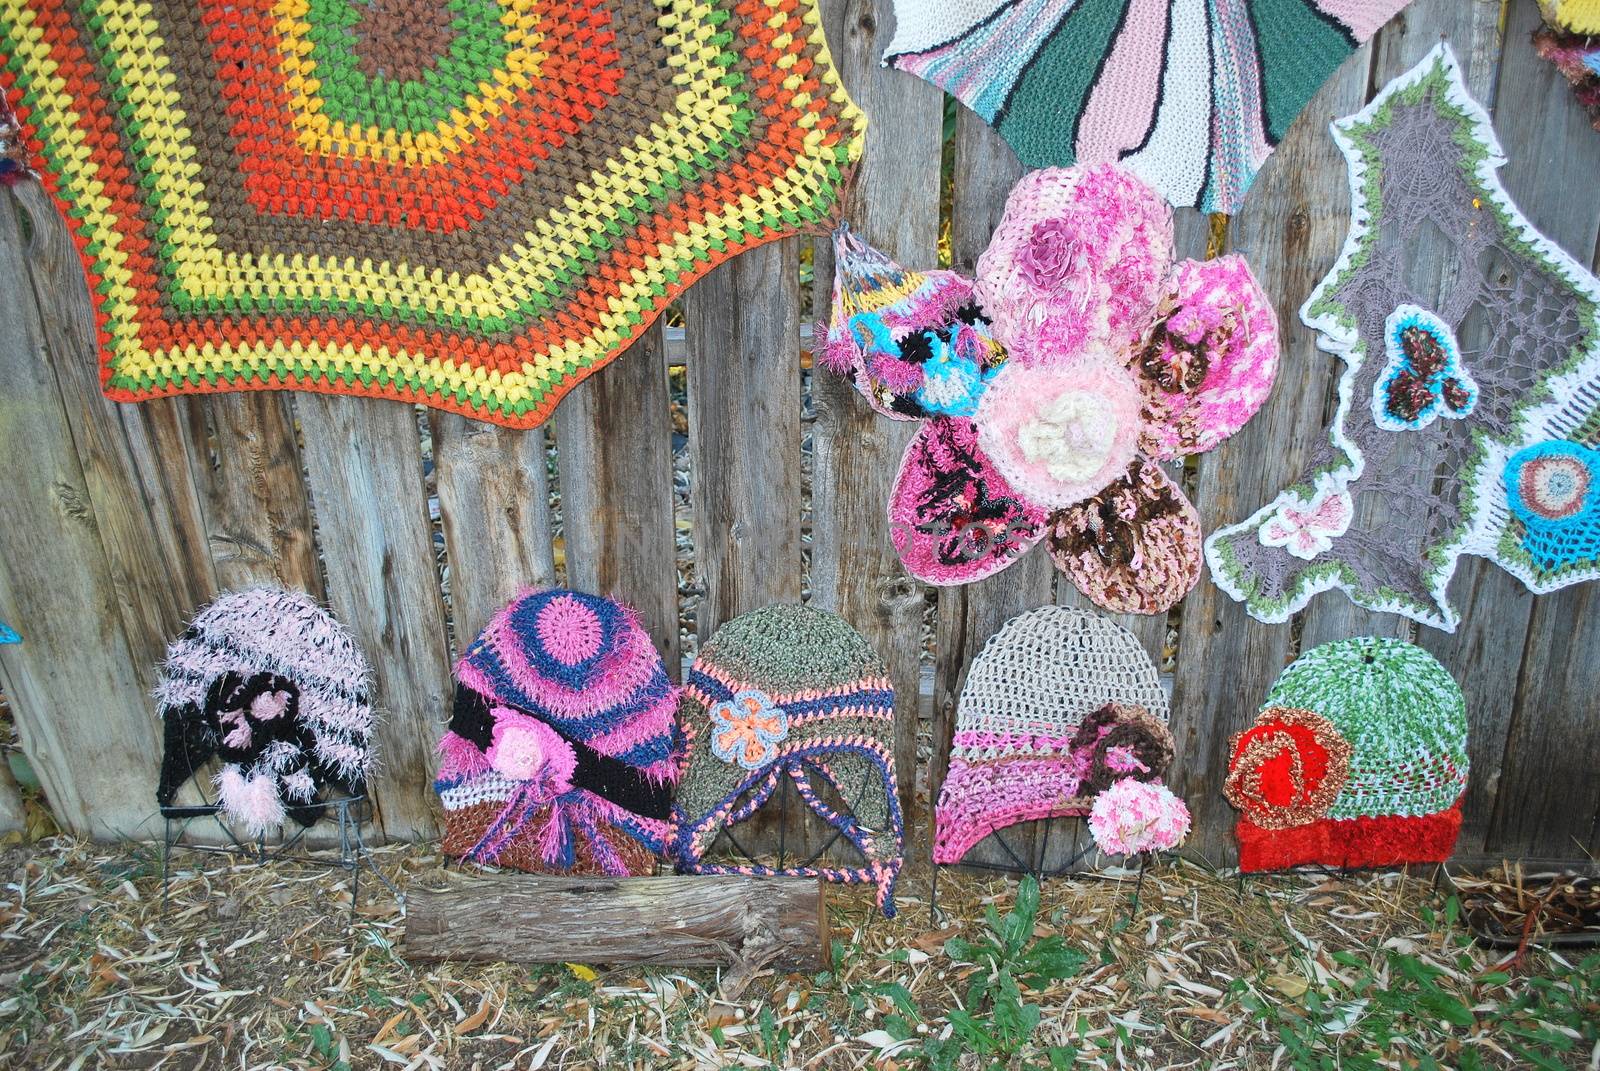 Crochet patterns displayed outdoors.